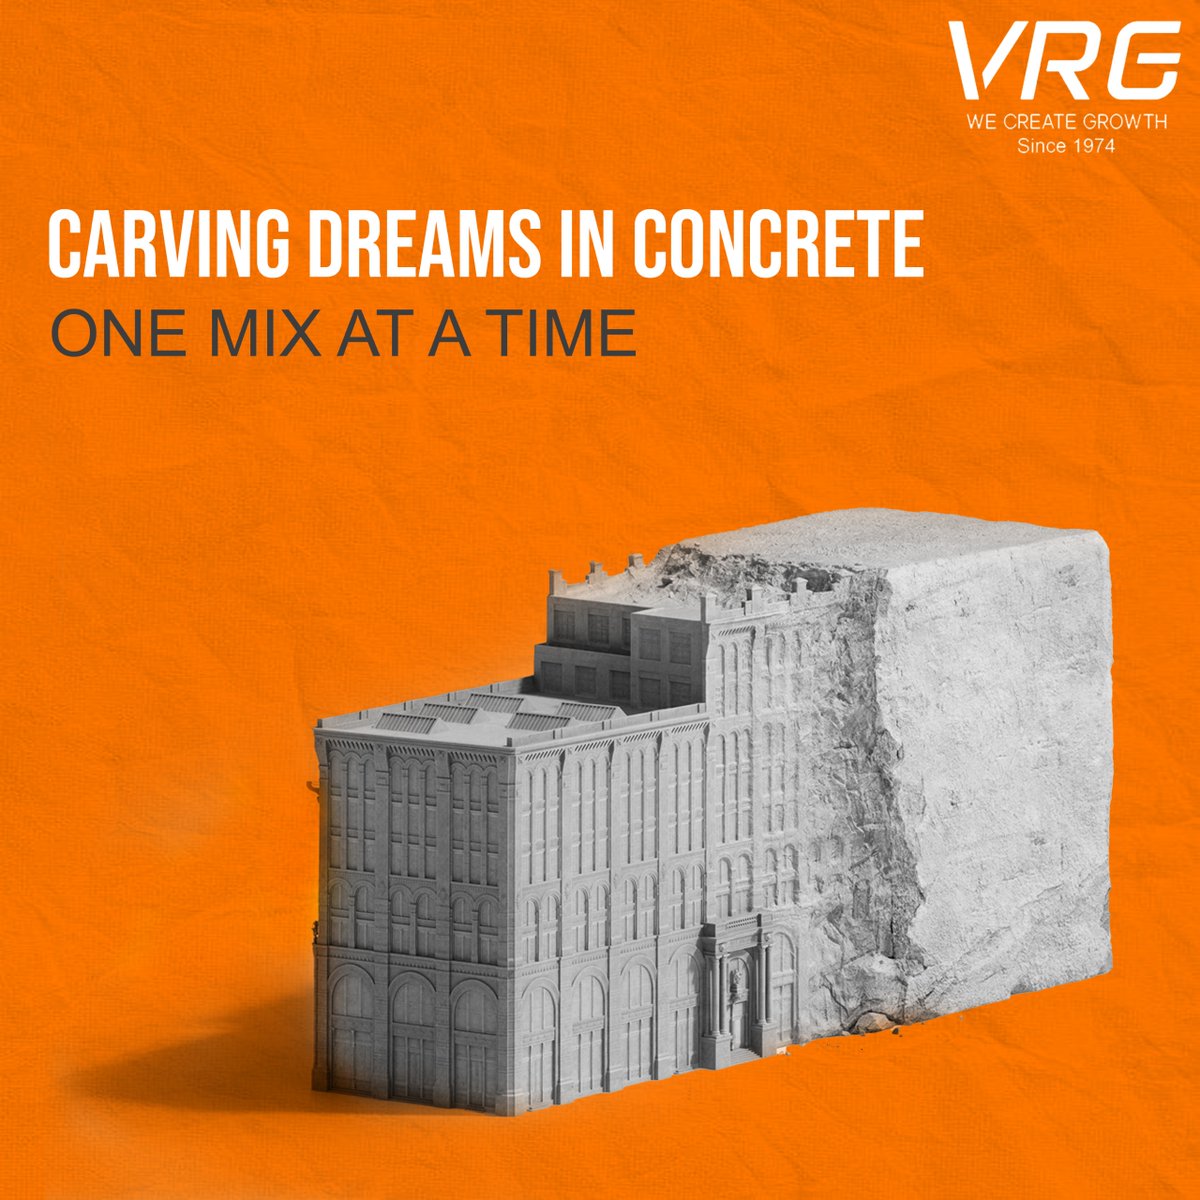 Our dedication through craftsmanship shines through each pour, as we thoroughly shape your visions into reality with the originality of every single mix. Trust us to bring your dreams into existence.

#Rasappanandco #vrggroup #vrgconcrete #karur #buildingmaterial #building